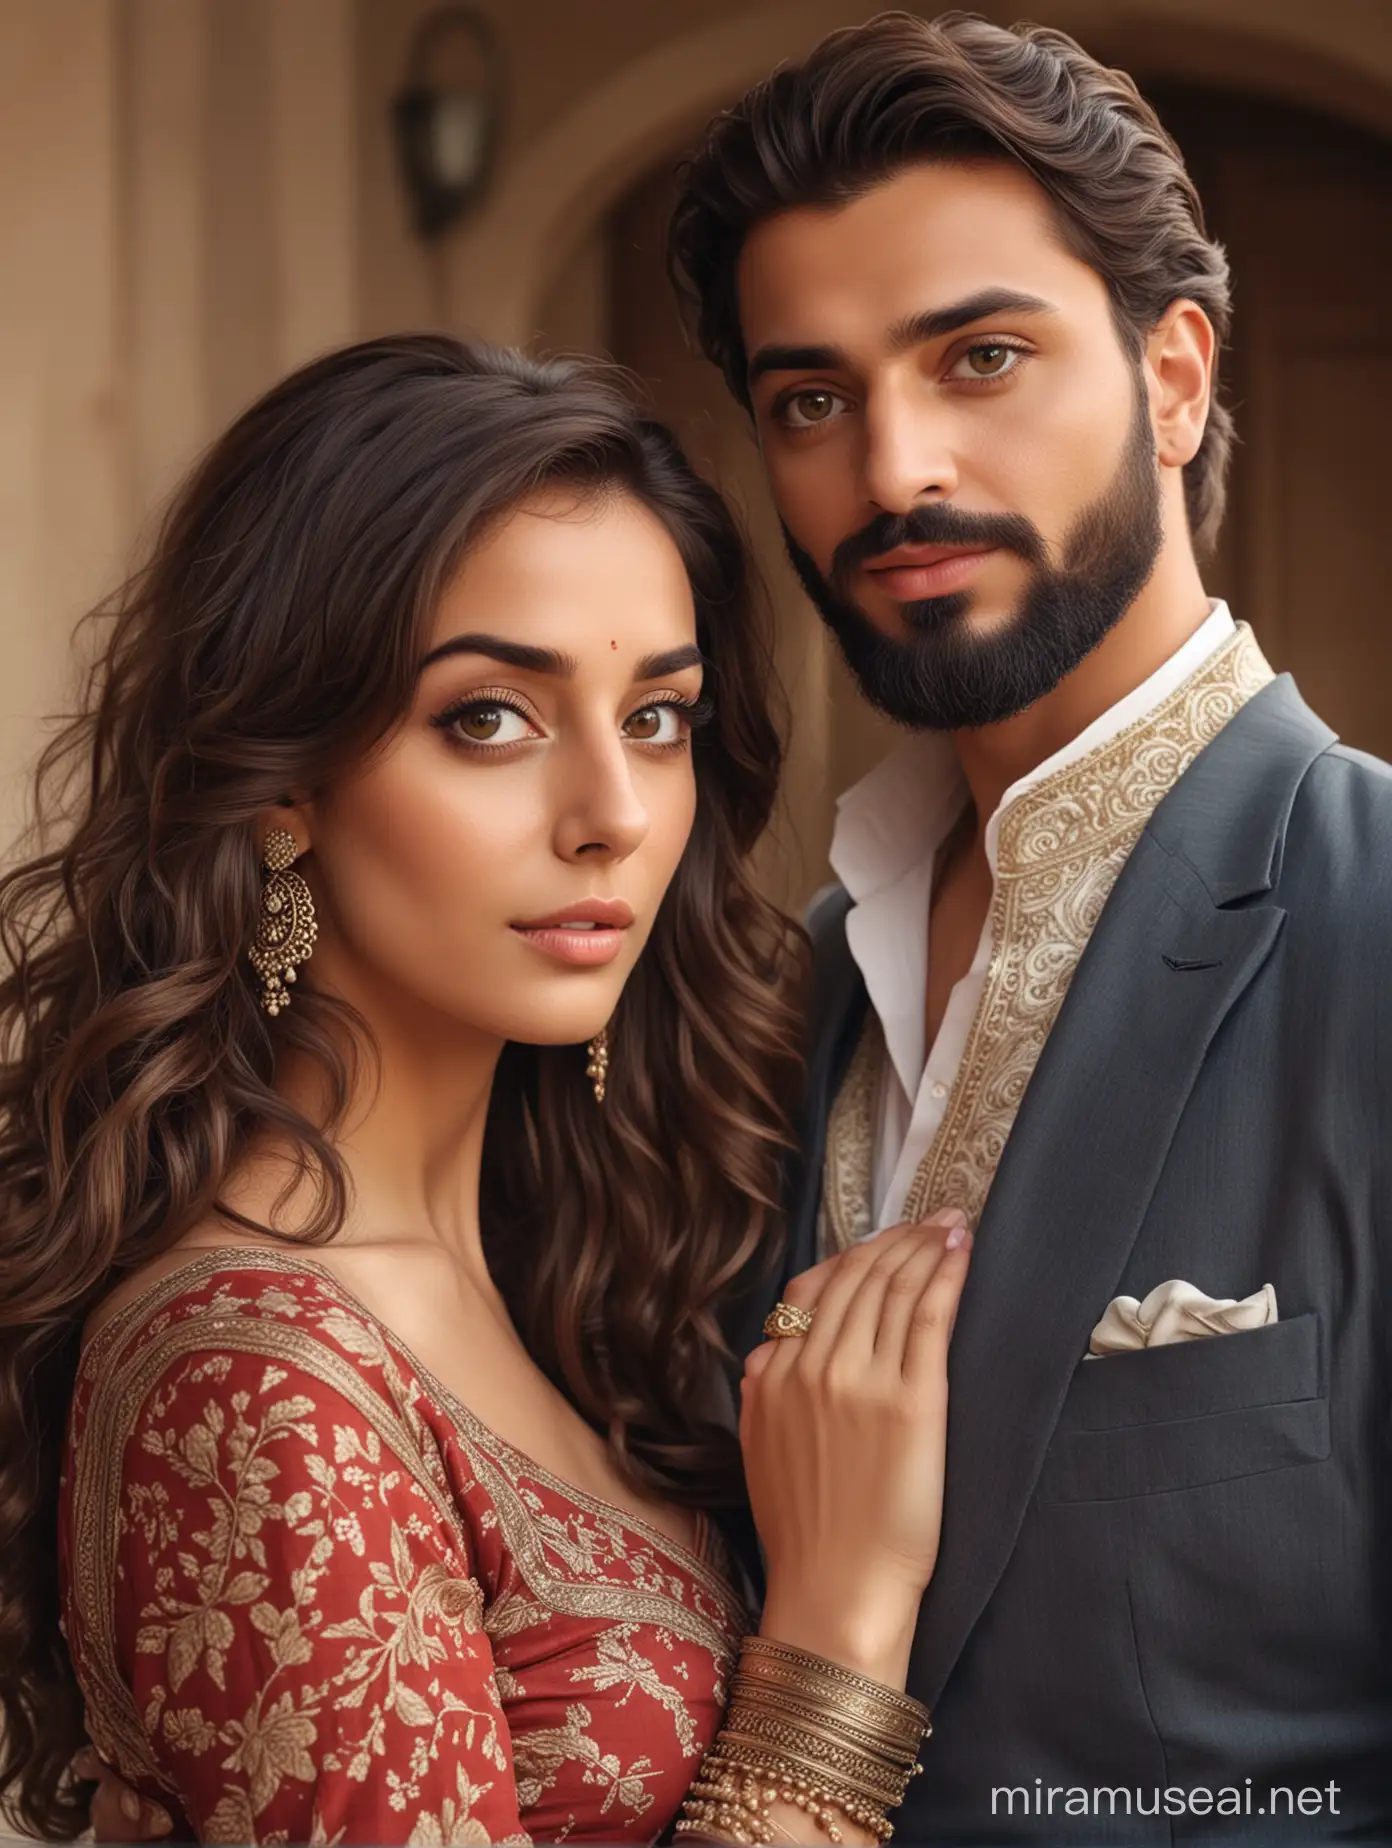 full photo of most beautiful european couple as most beautiful indian couple, most beautiful girl in elegant saree and long curly hairs, big wide eyes, full face, full makeup, sleeveless  man with stylish beard, man perfect short hair cut,  formals, photo realistic, middle shot, 4k.